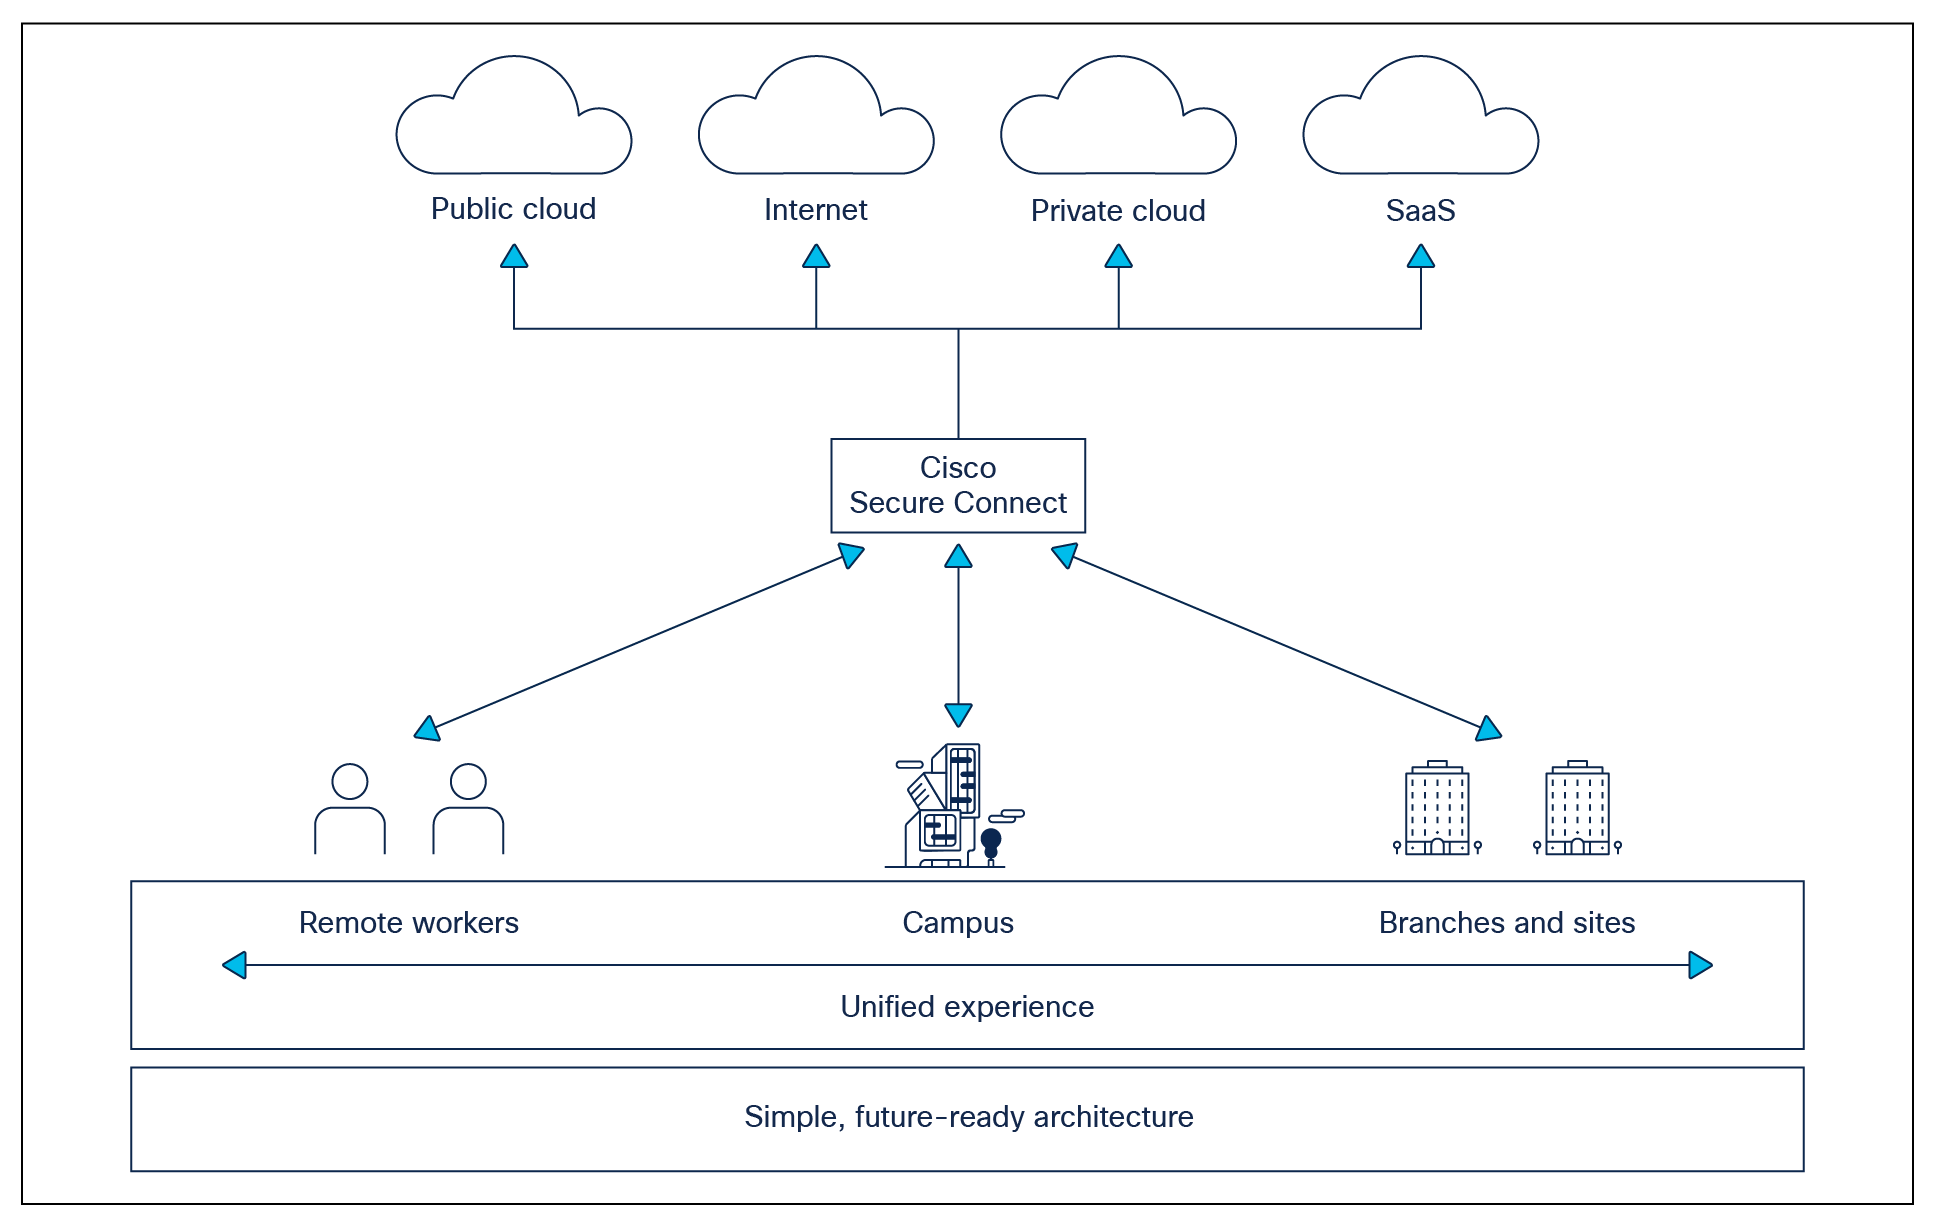 Cisco Secure Connect use cases